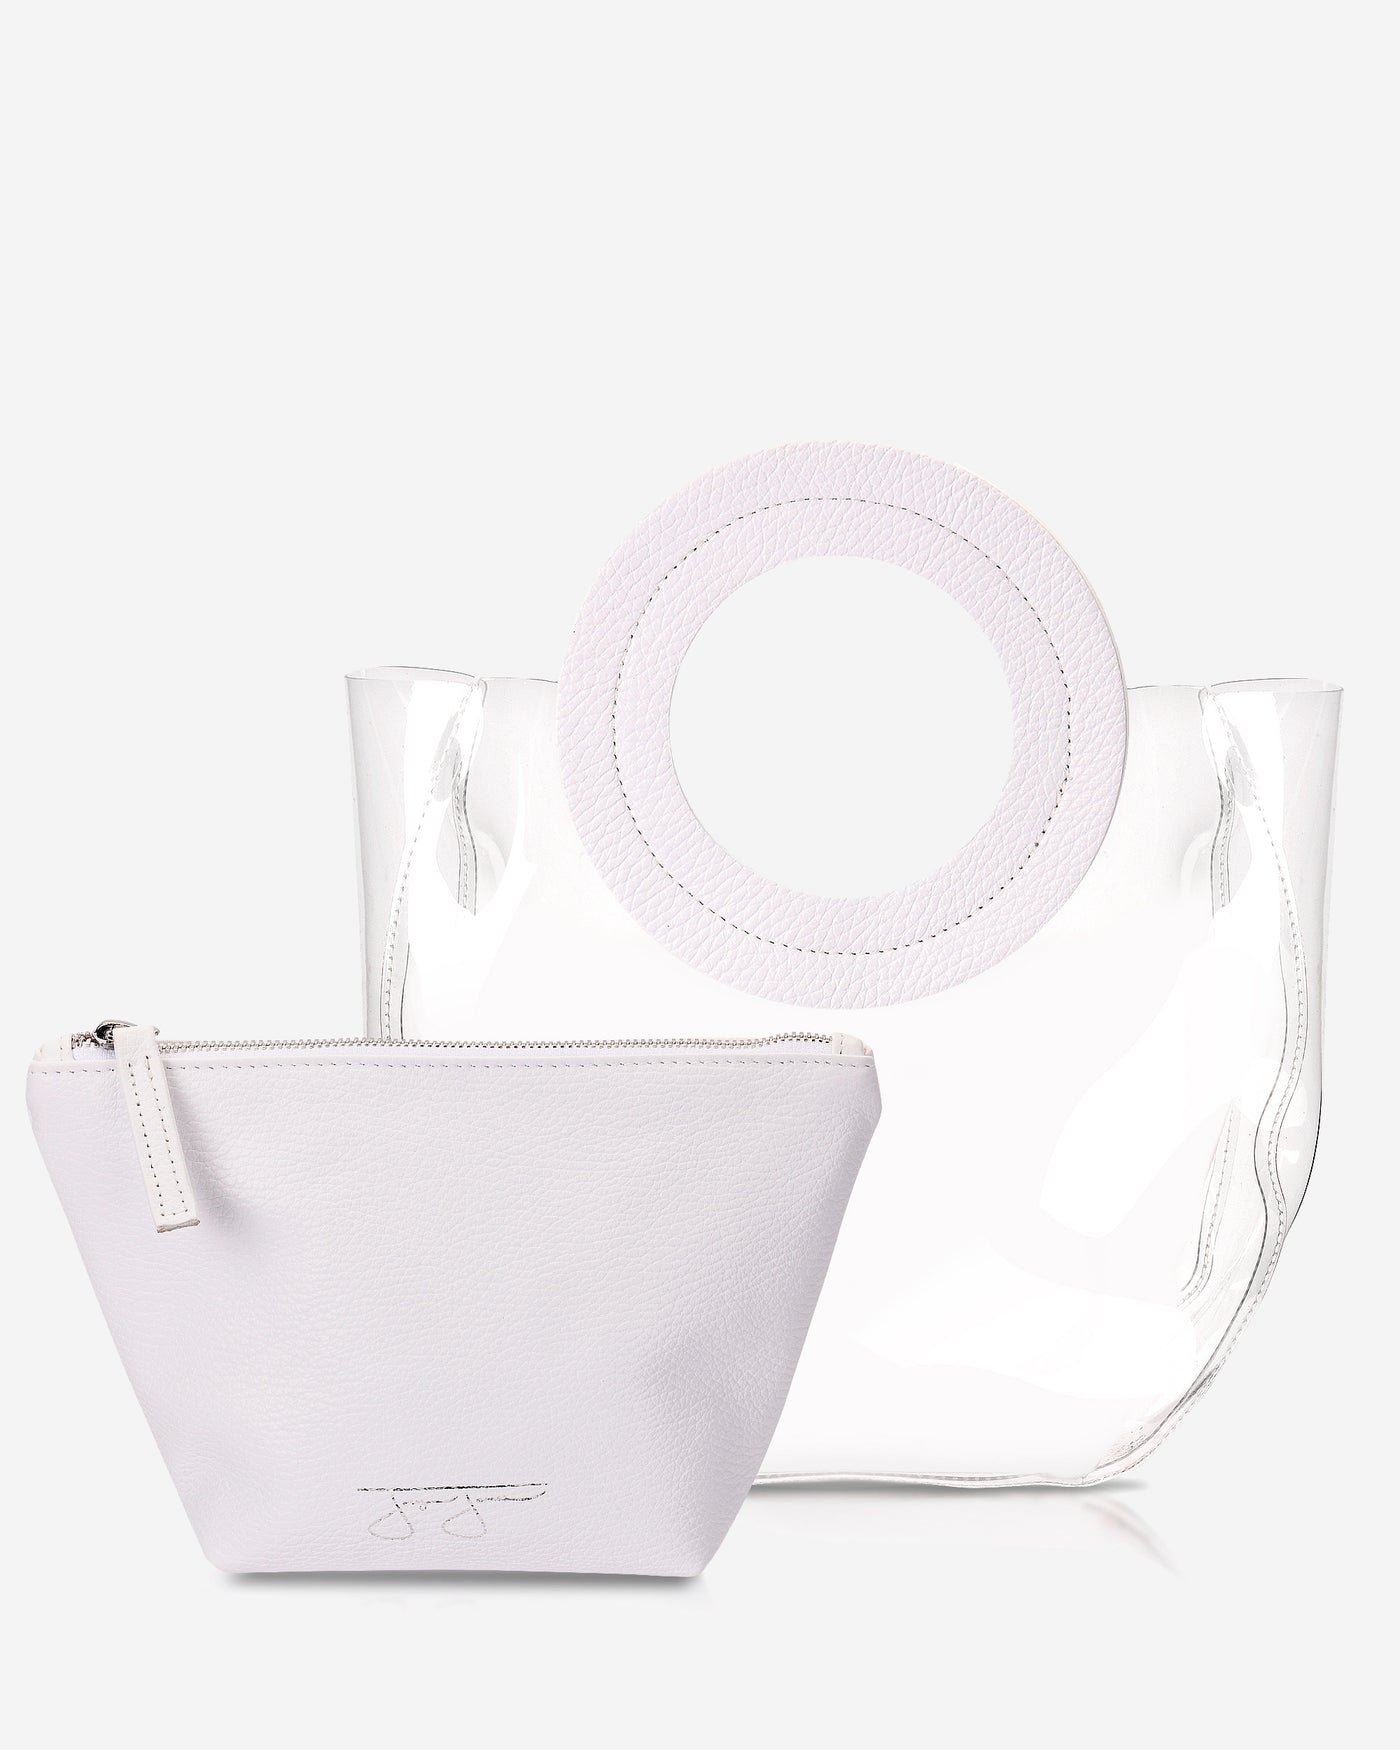 Lacey Bag - White Lacey Clear Bag Joey James, The Label   